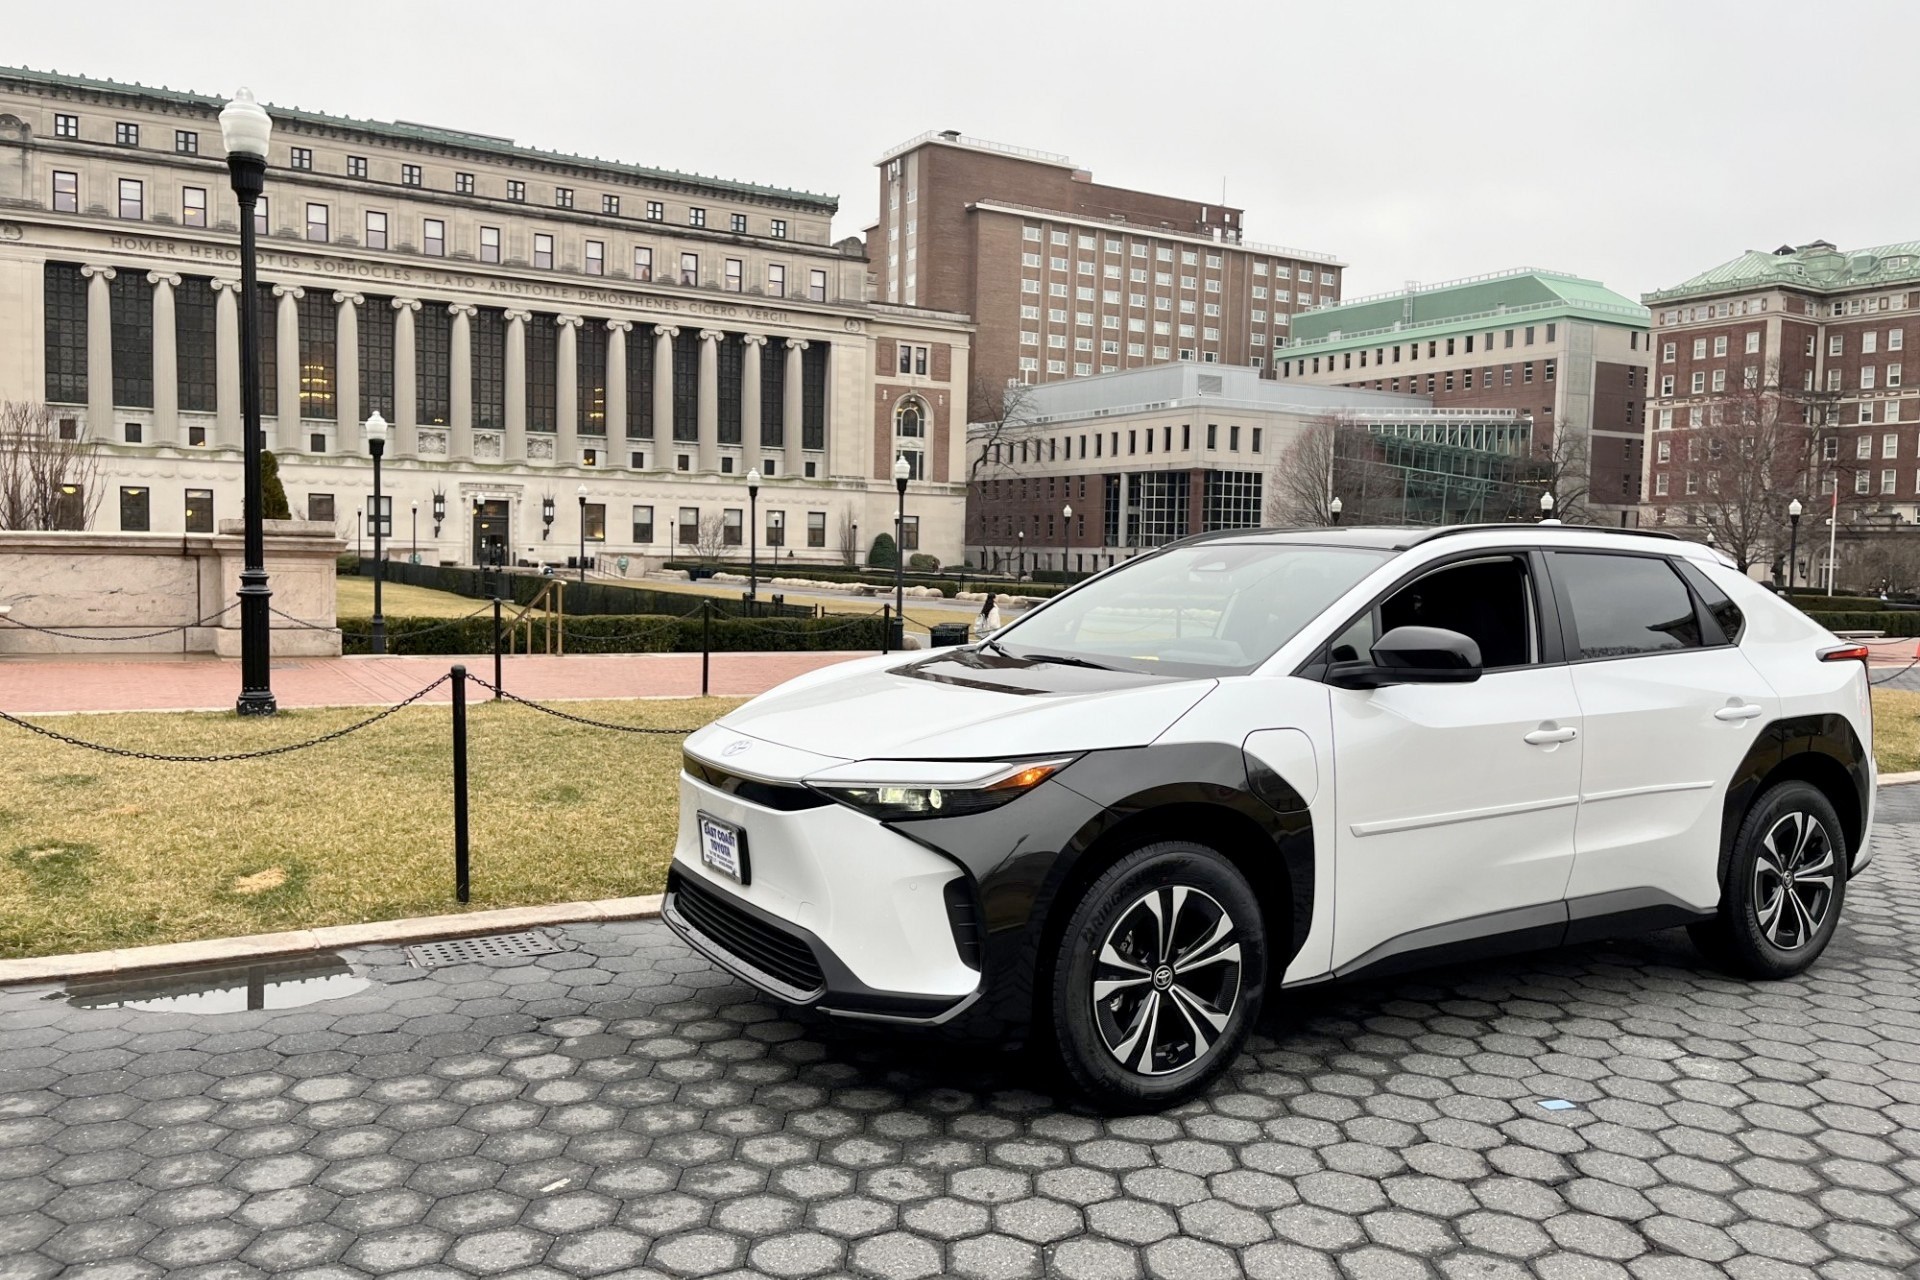 A new electric SUV that was purchased for the Public Safety fleet is parked on College Walk, with Butler Library in the background.